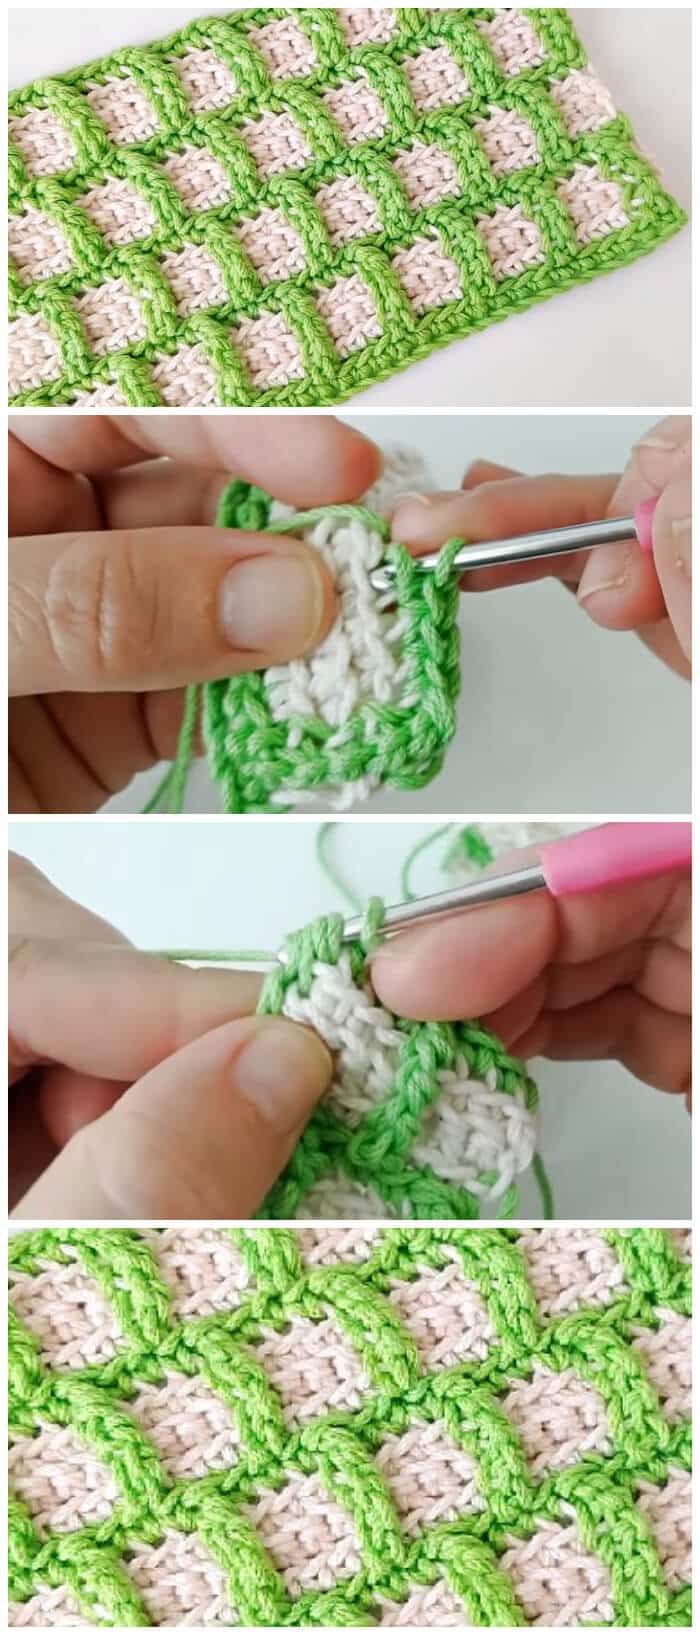 This Free Easy Crochet stitch is on of the most beautiful stitch for me and One of the best things about crochet is that even beginners can make beautiful, functional project.